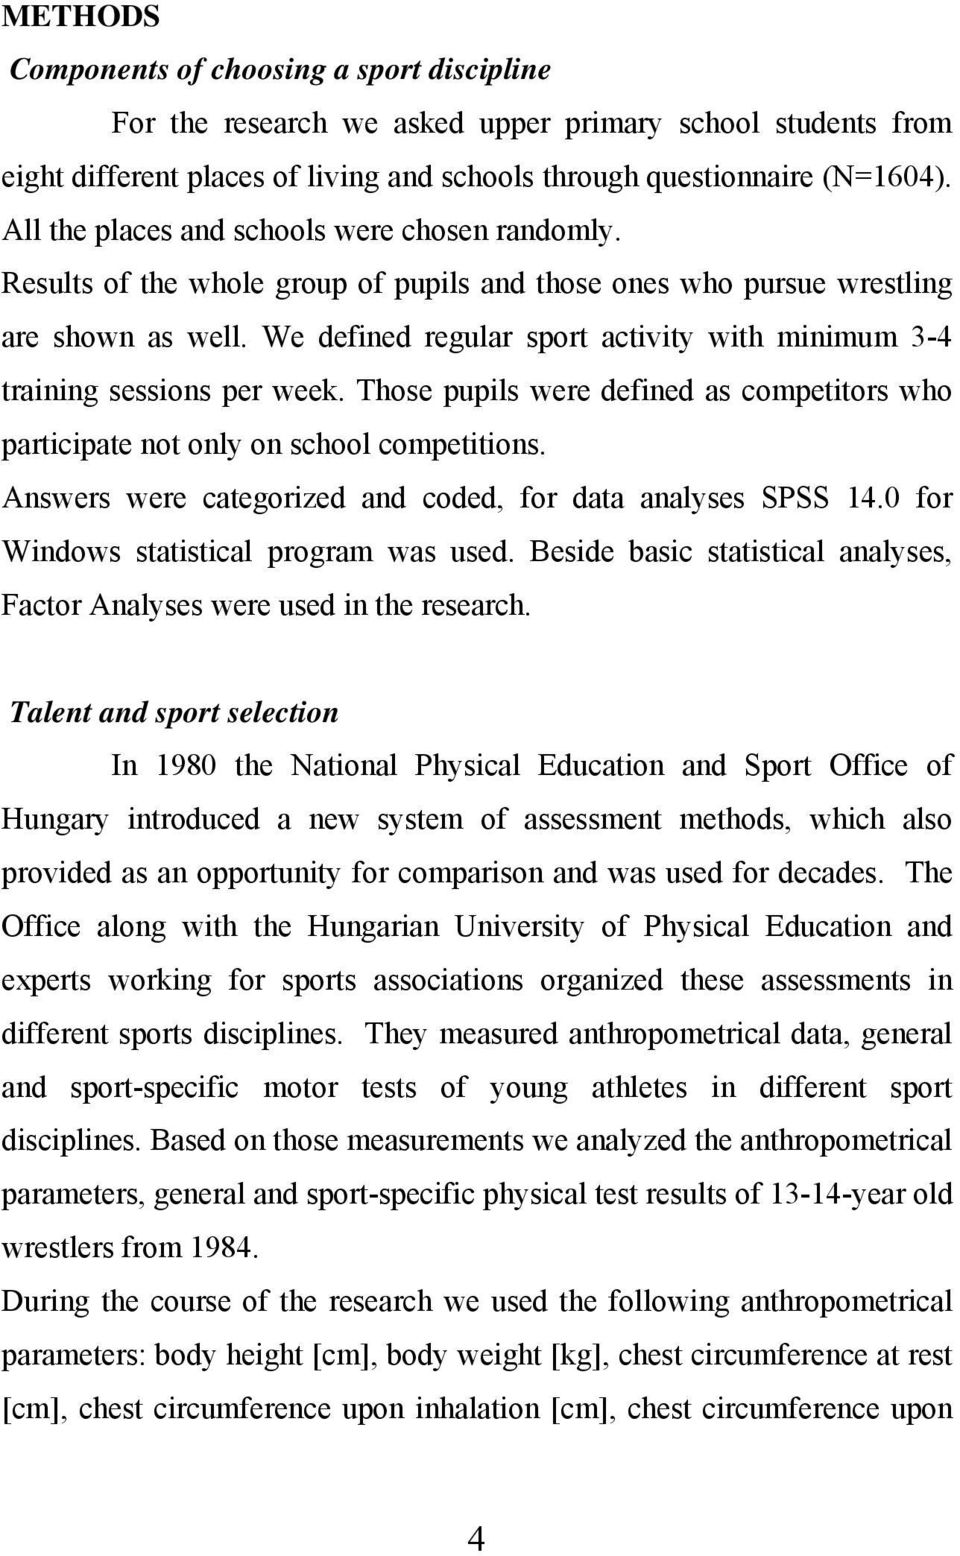 We defined regular sport activity with minimum 3-4 training sessions per week. Those pupils were defined as competitors who participate not only on school competitions.